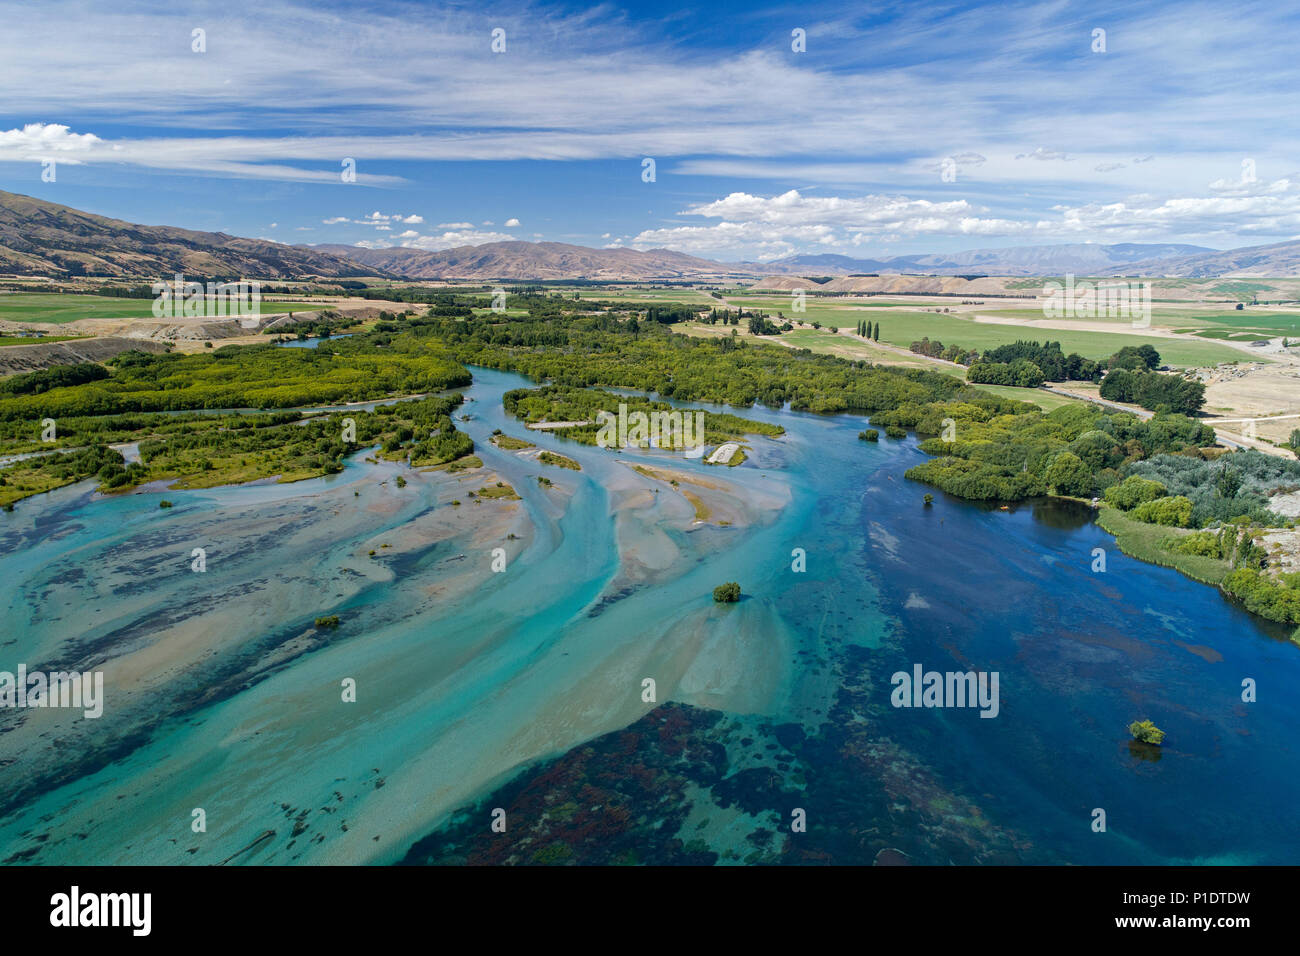 Clutha River entering Lake Dunstan, Central Otago, South Island, New Zealand - drone aerial Stock Photo